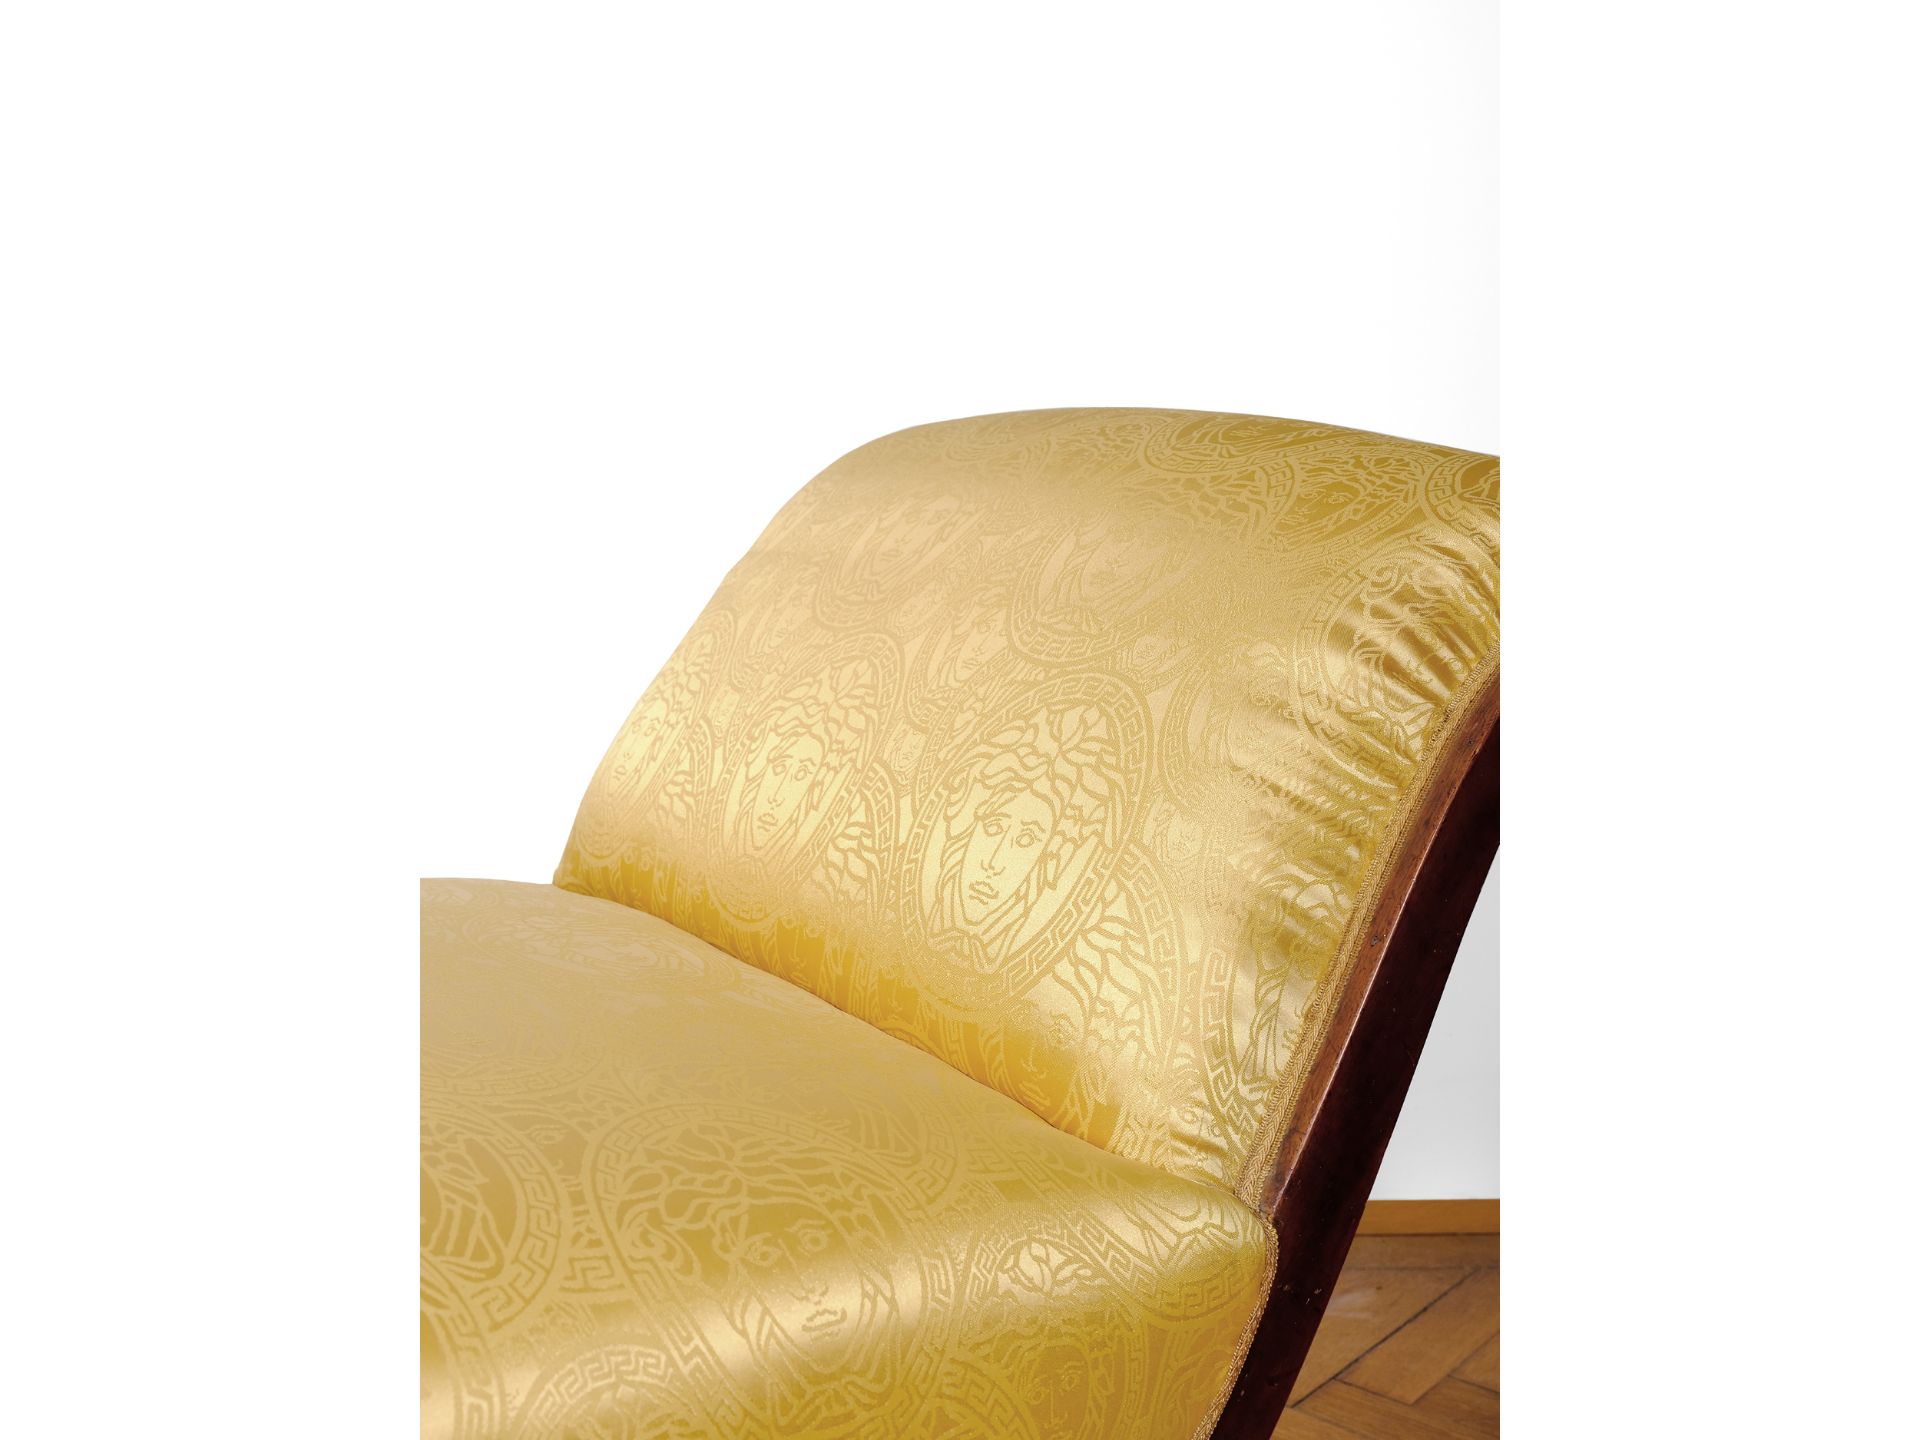 Chaise longue, German or French, Biedermeier - Image 3 of 4